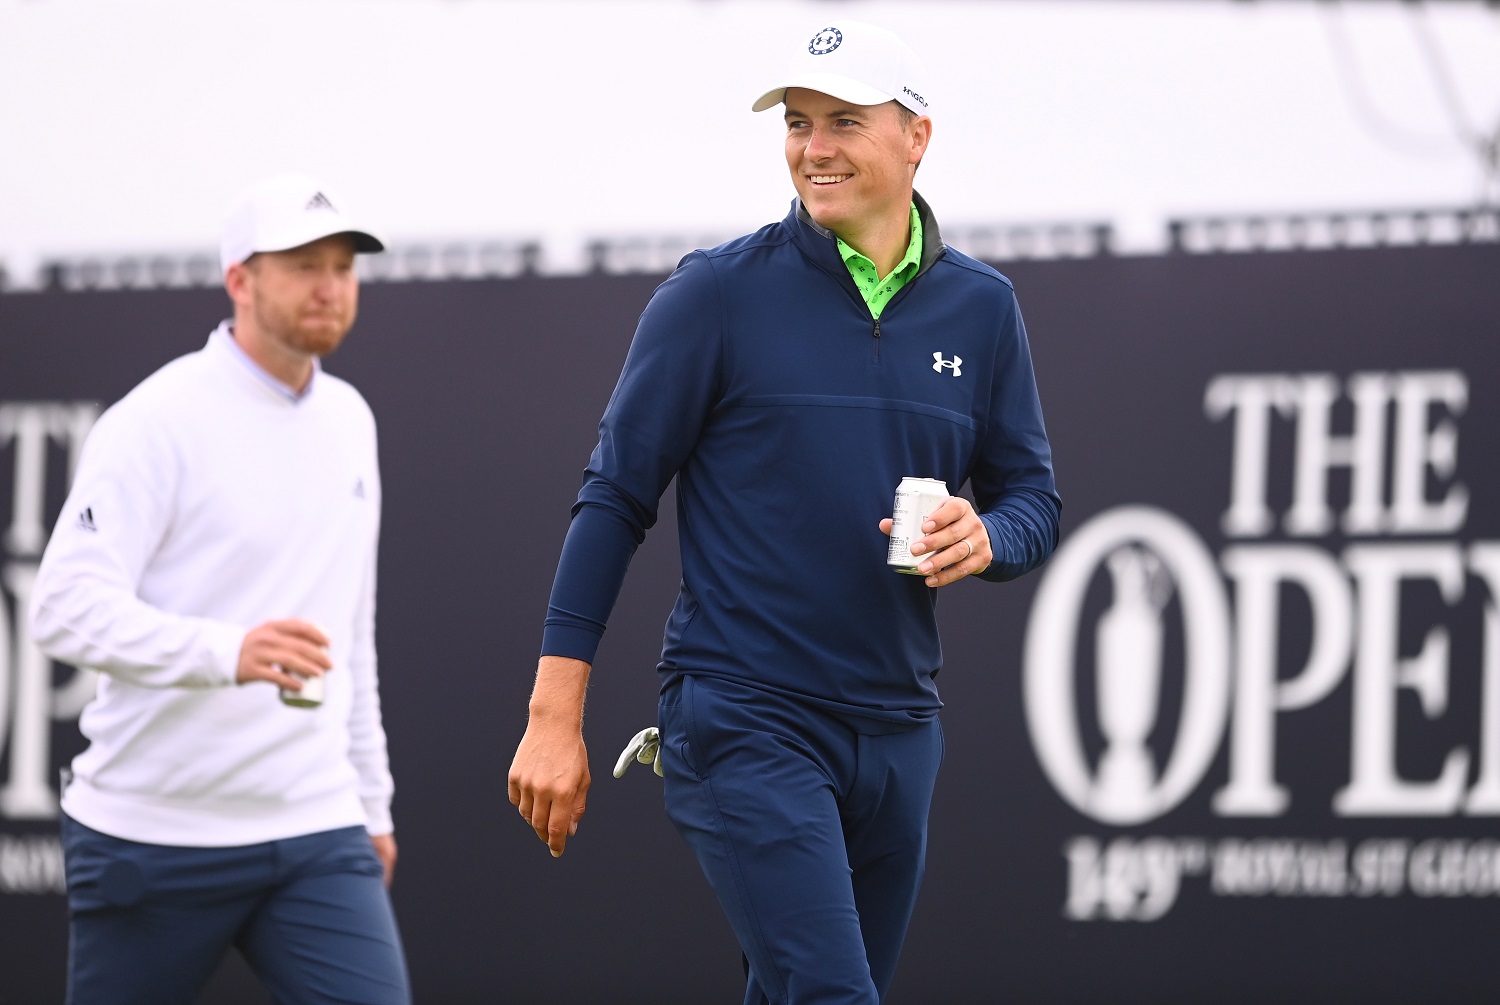 Jordan Spieth smiles during a practice round for the British Open at Royal St George’s Golf Club on July 14, 2021, in Sandwich, England.